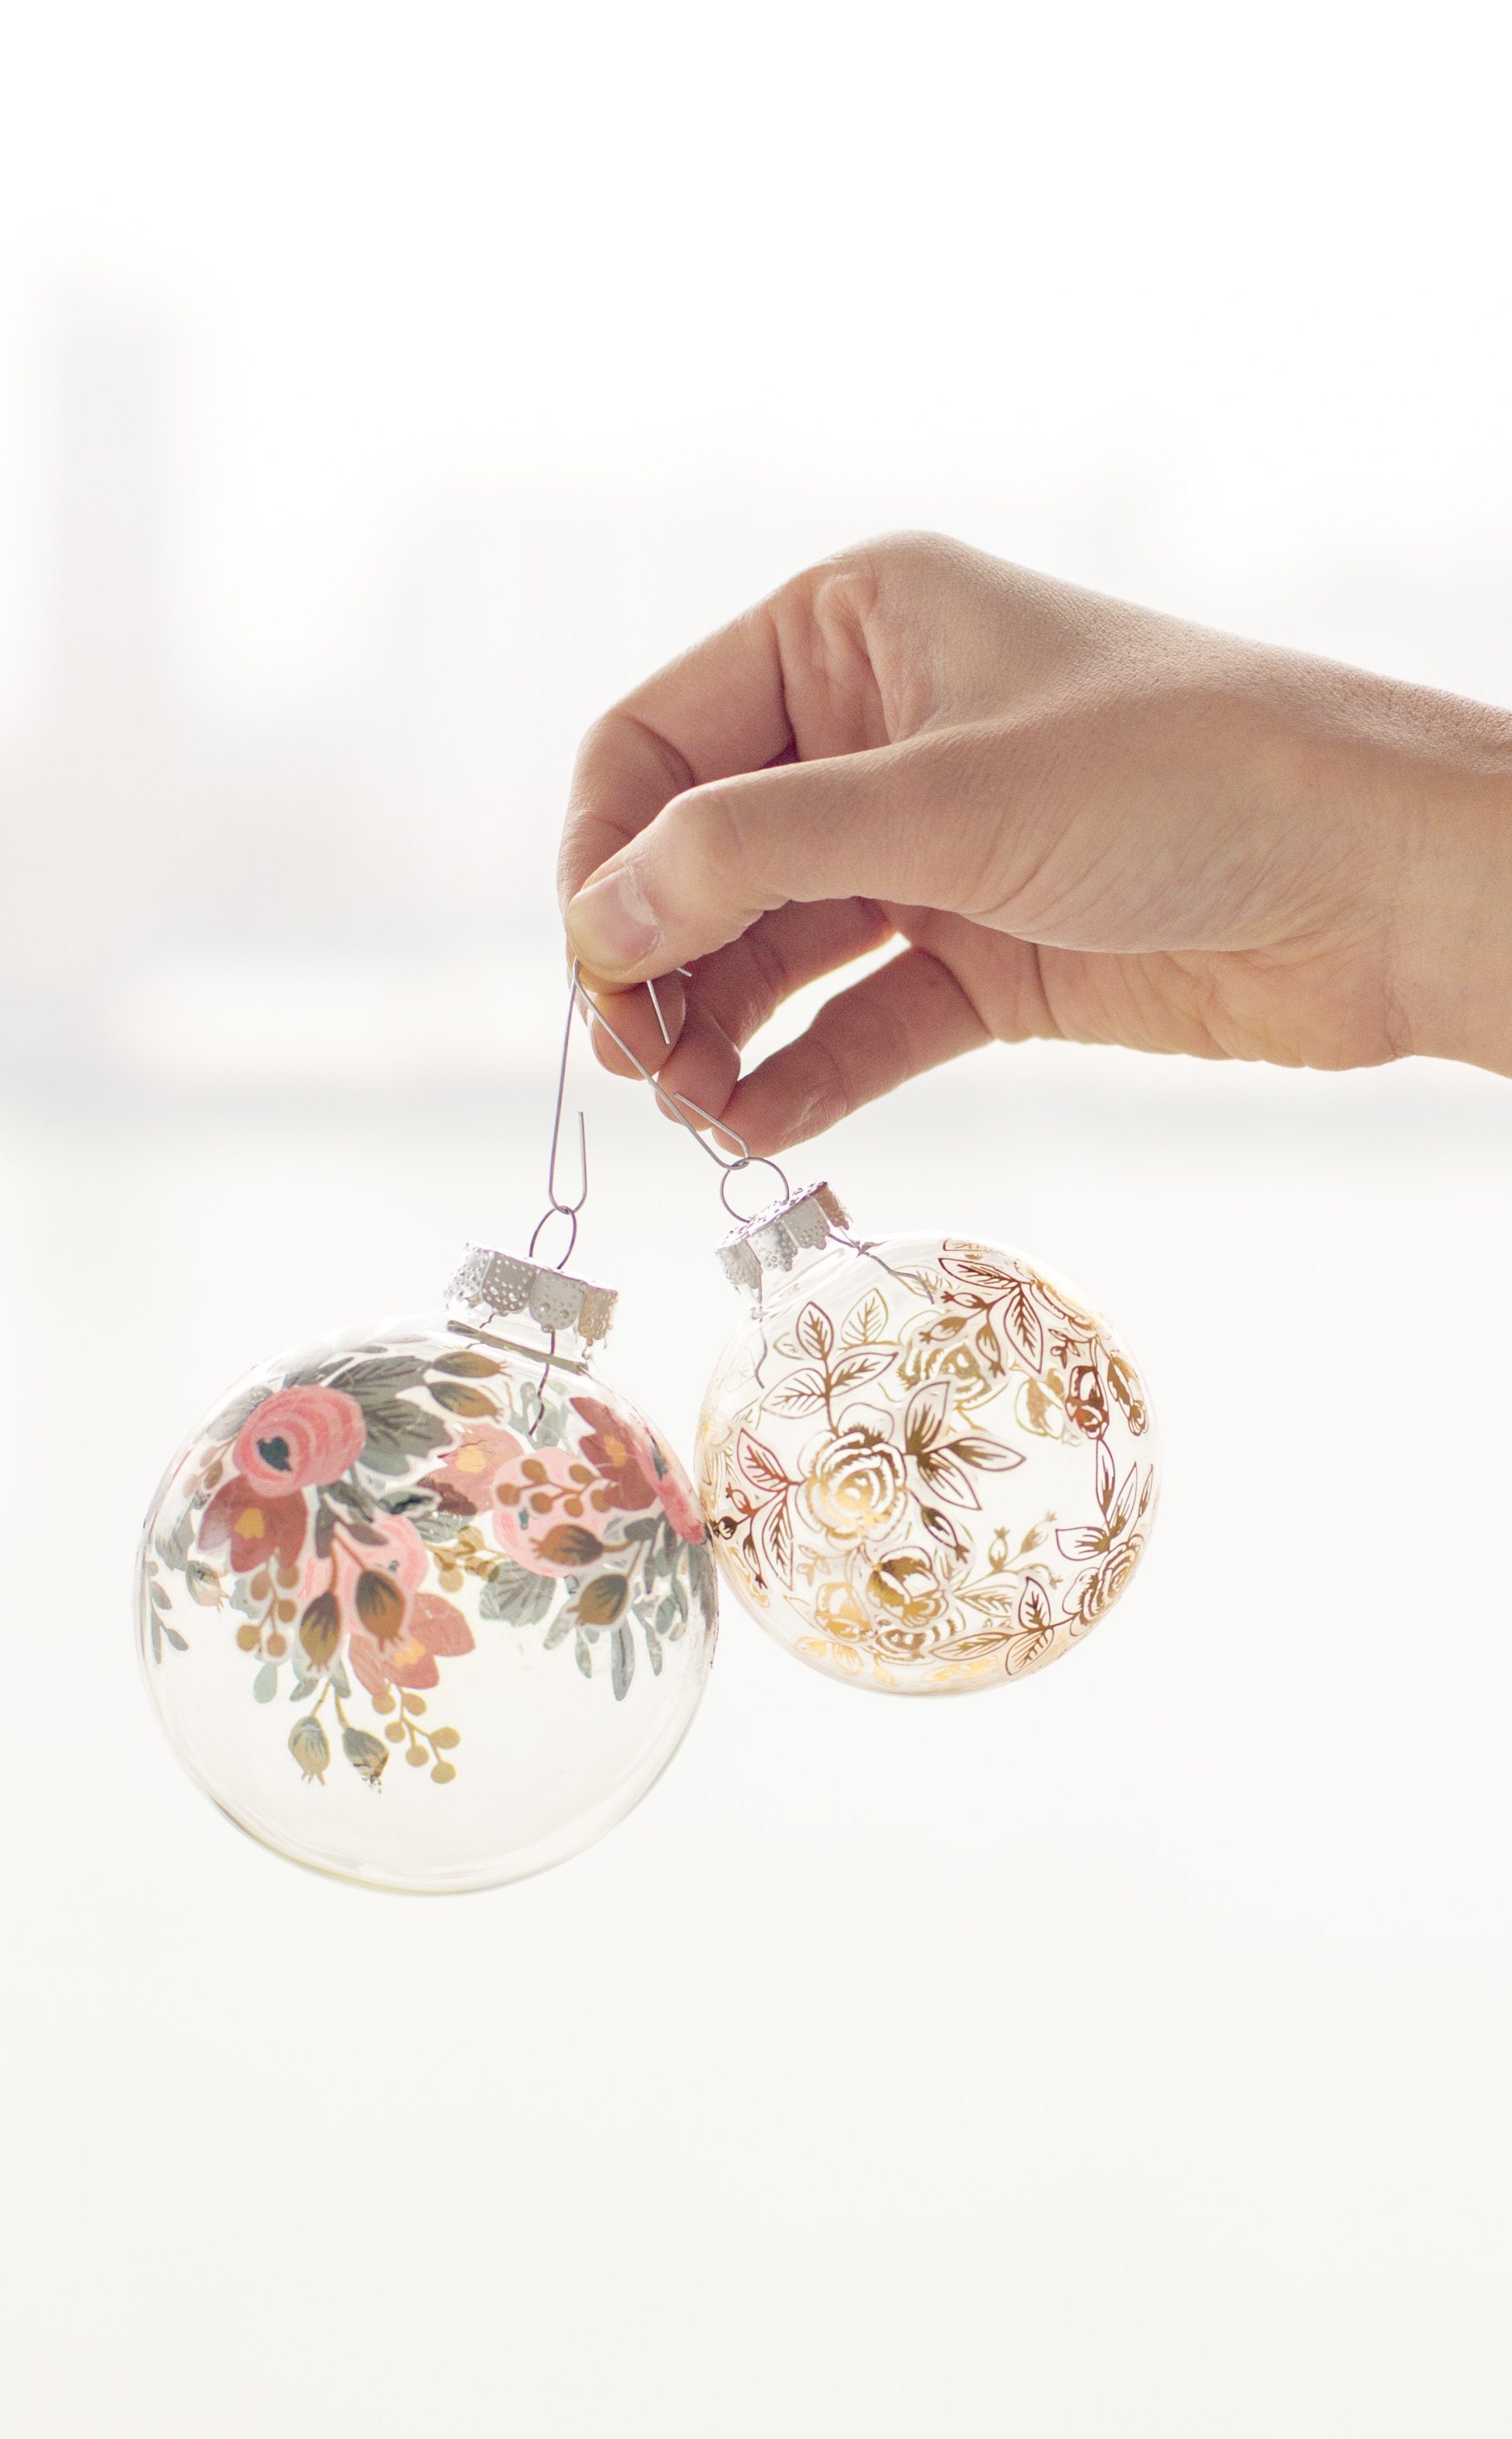 DIY Temporary Tattoo Ornaments | Easy glass ornament craft ideas from @cydconverse